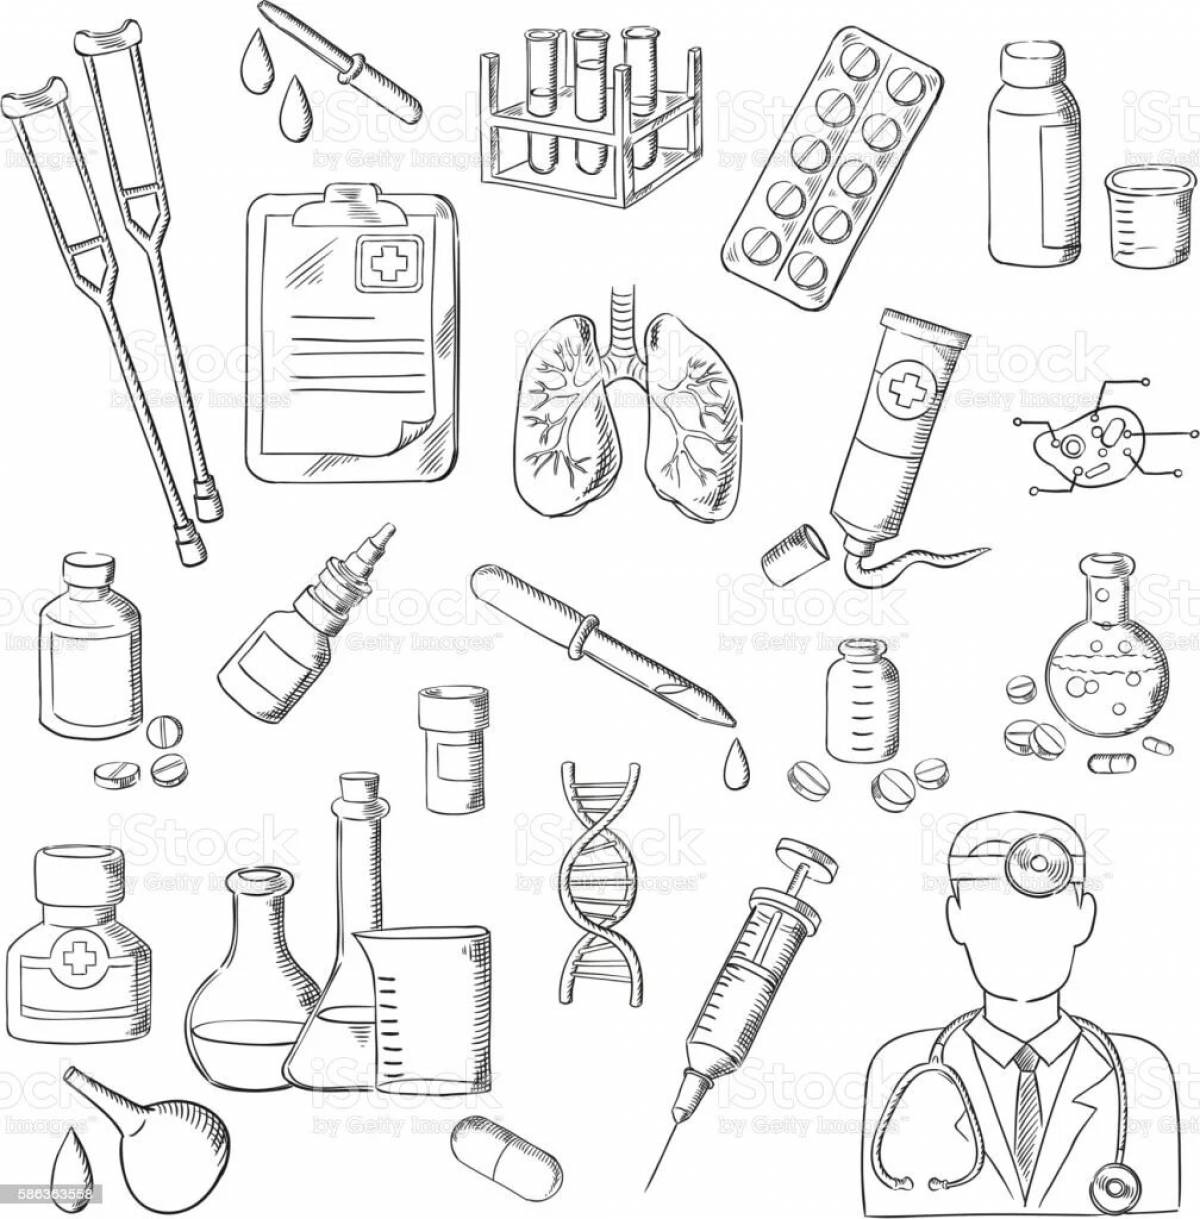 Colouring awesome medical instruments